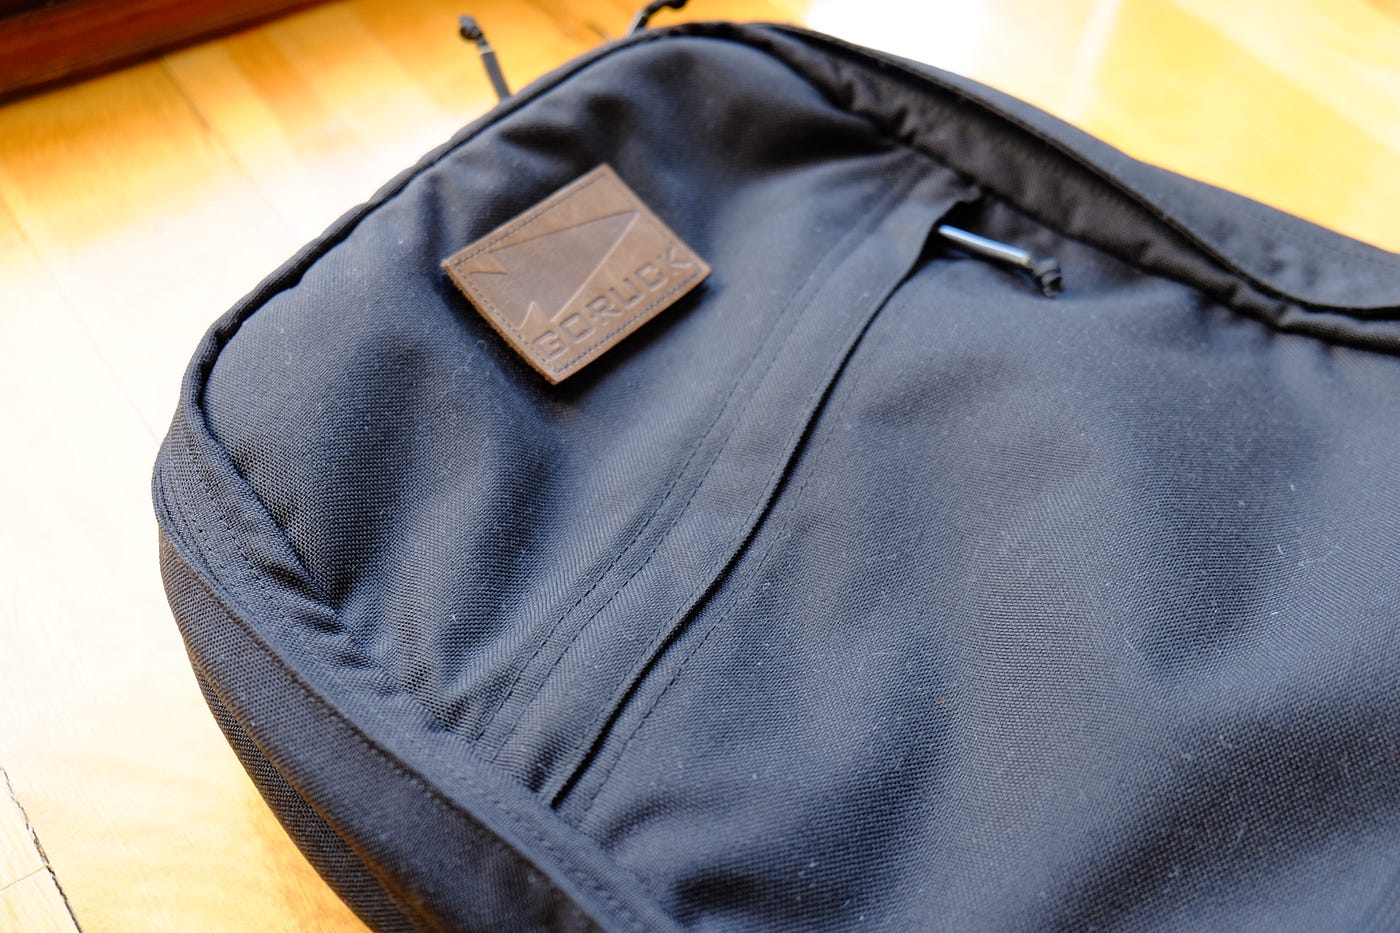 Goruck GR1 (26L) Backpack Review. I had many messenger bags in the past ...